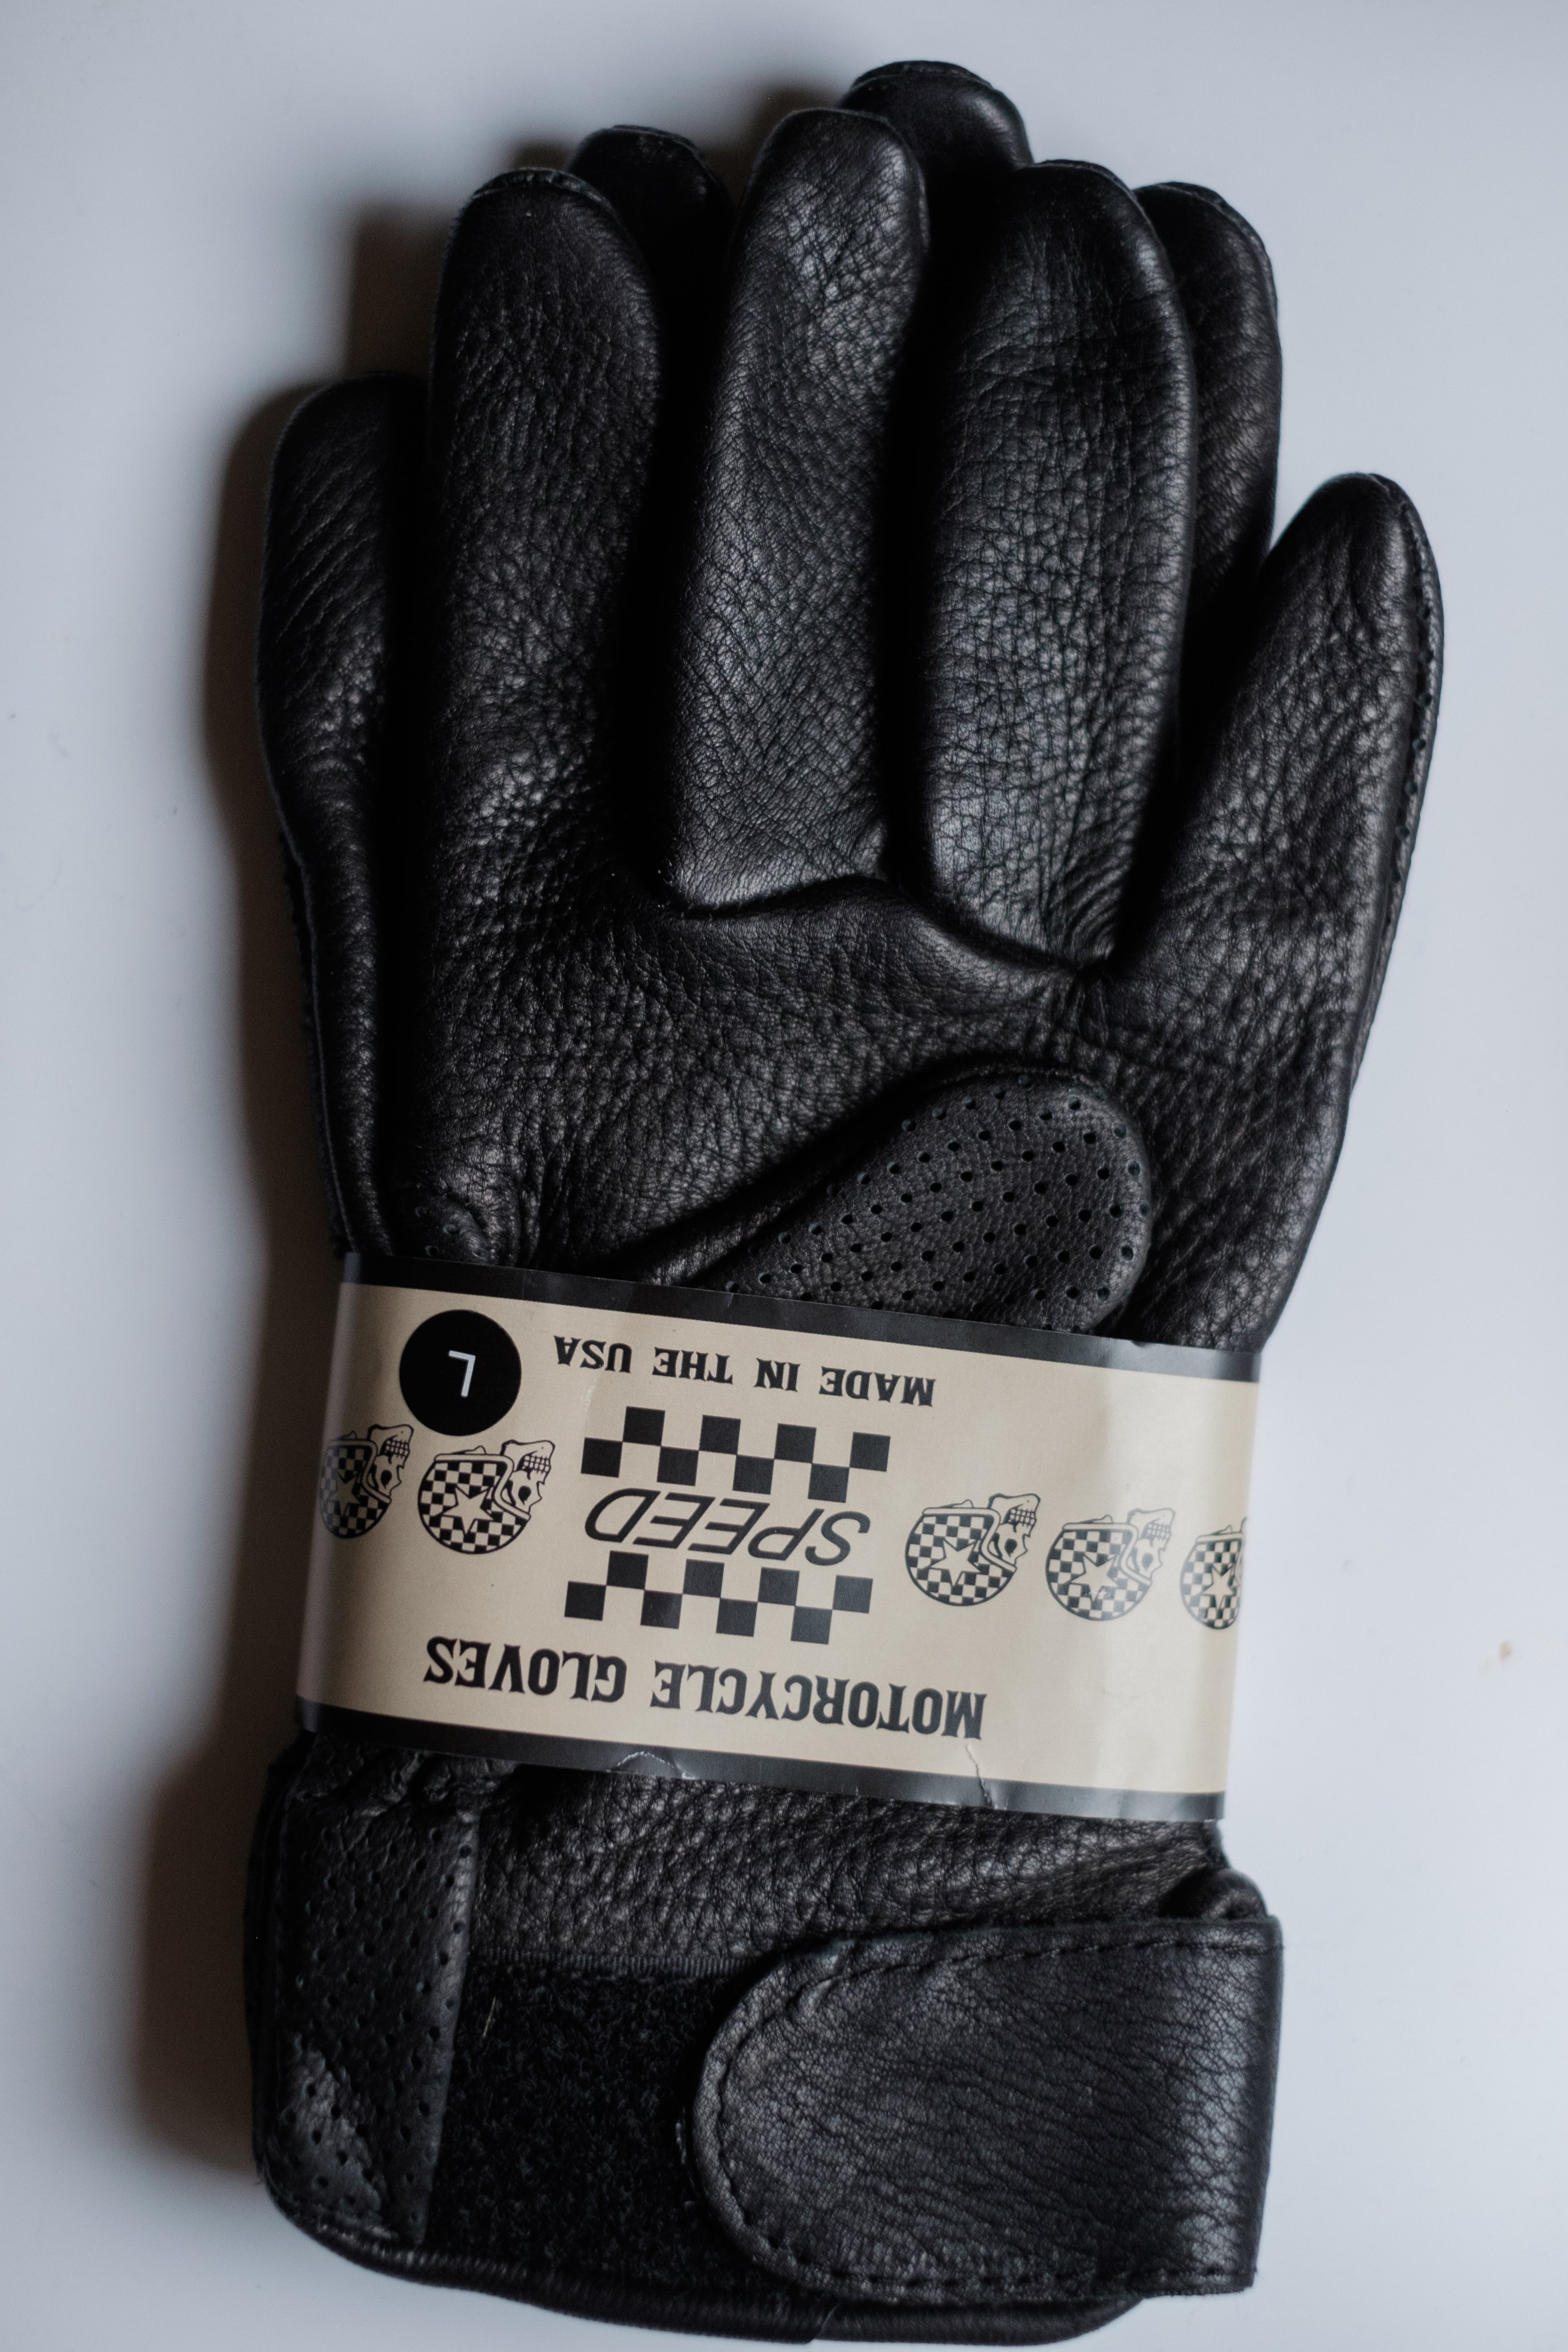 Speed California Gloves "Motorcycle Gloves"